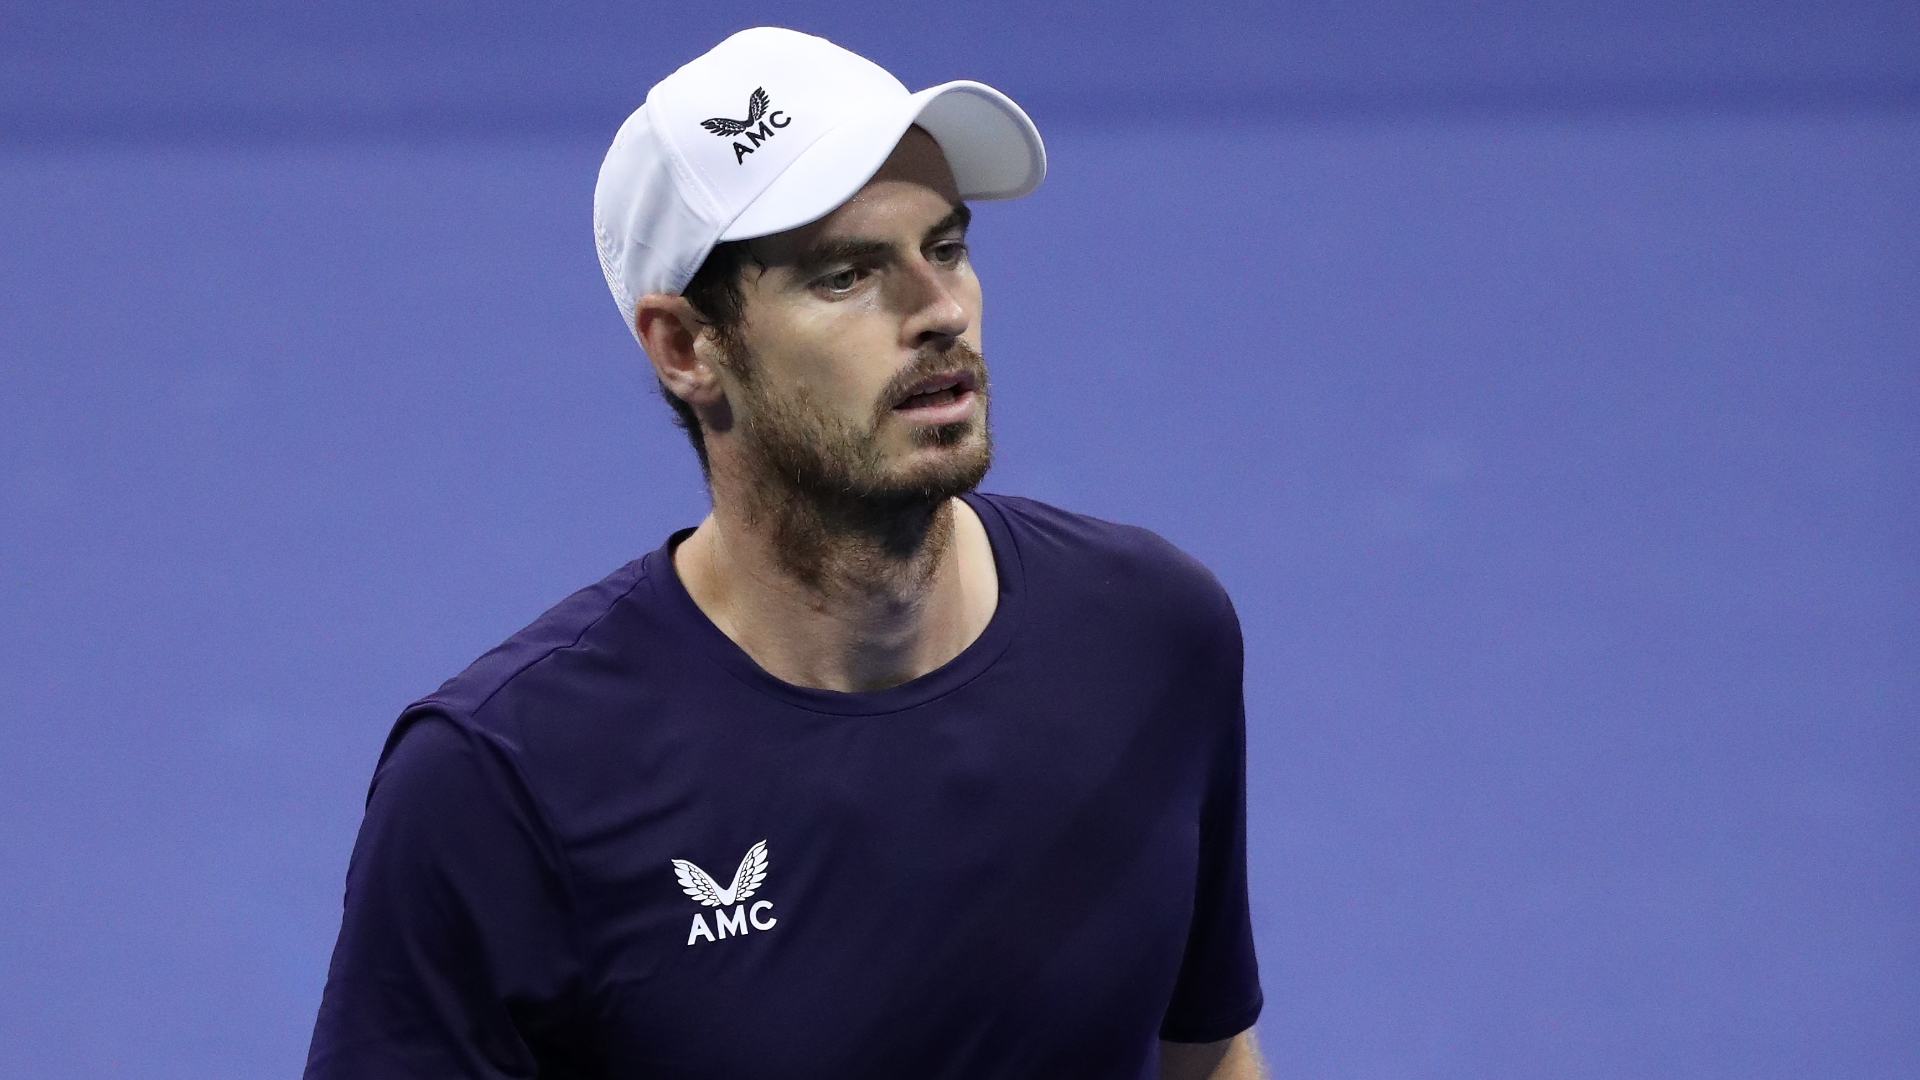 Andy Murray eliminated at US Open by Felix Auger Aliassime